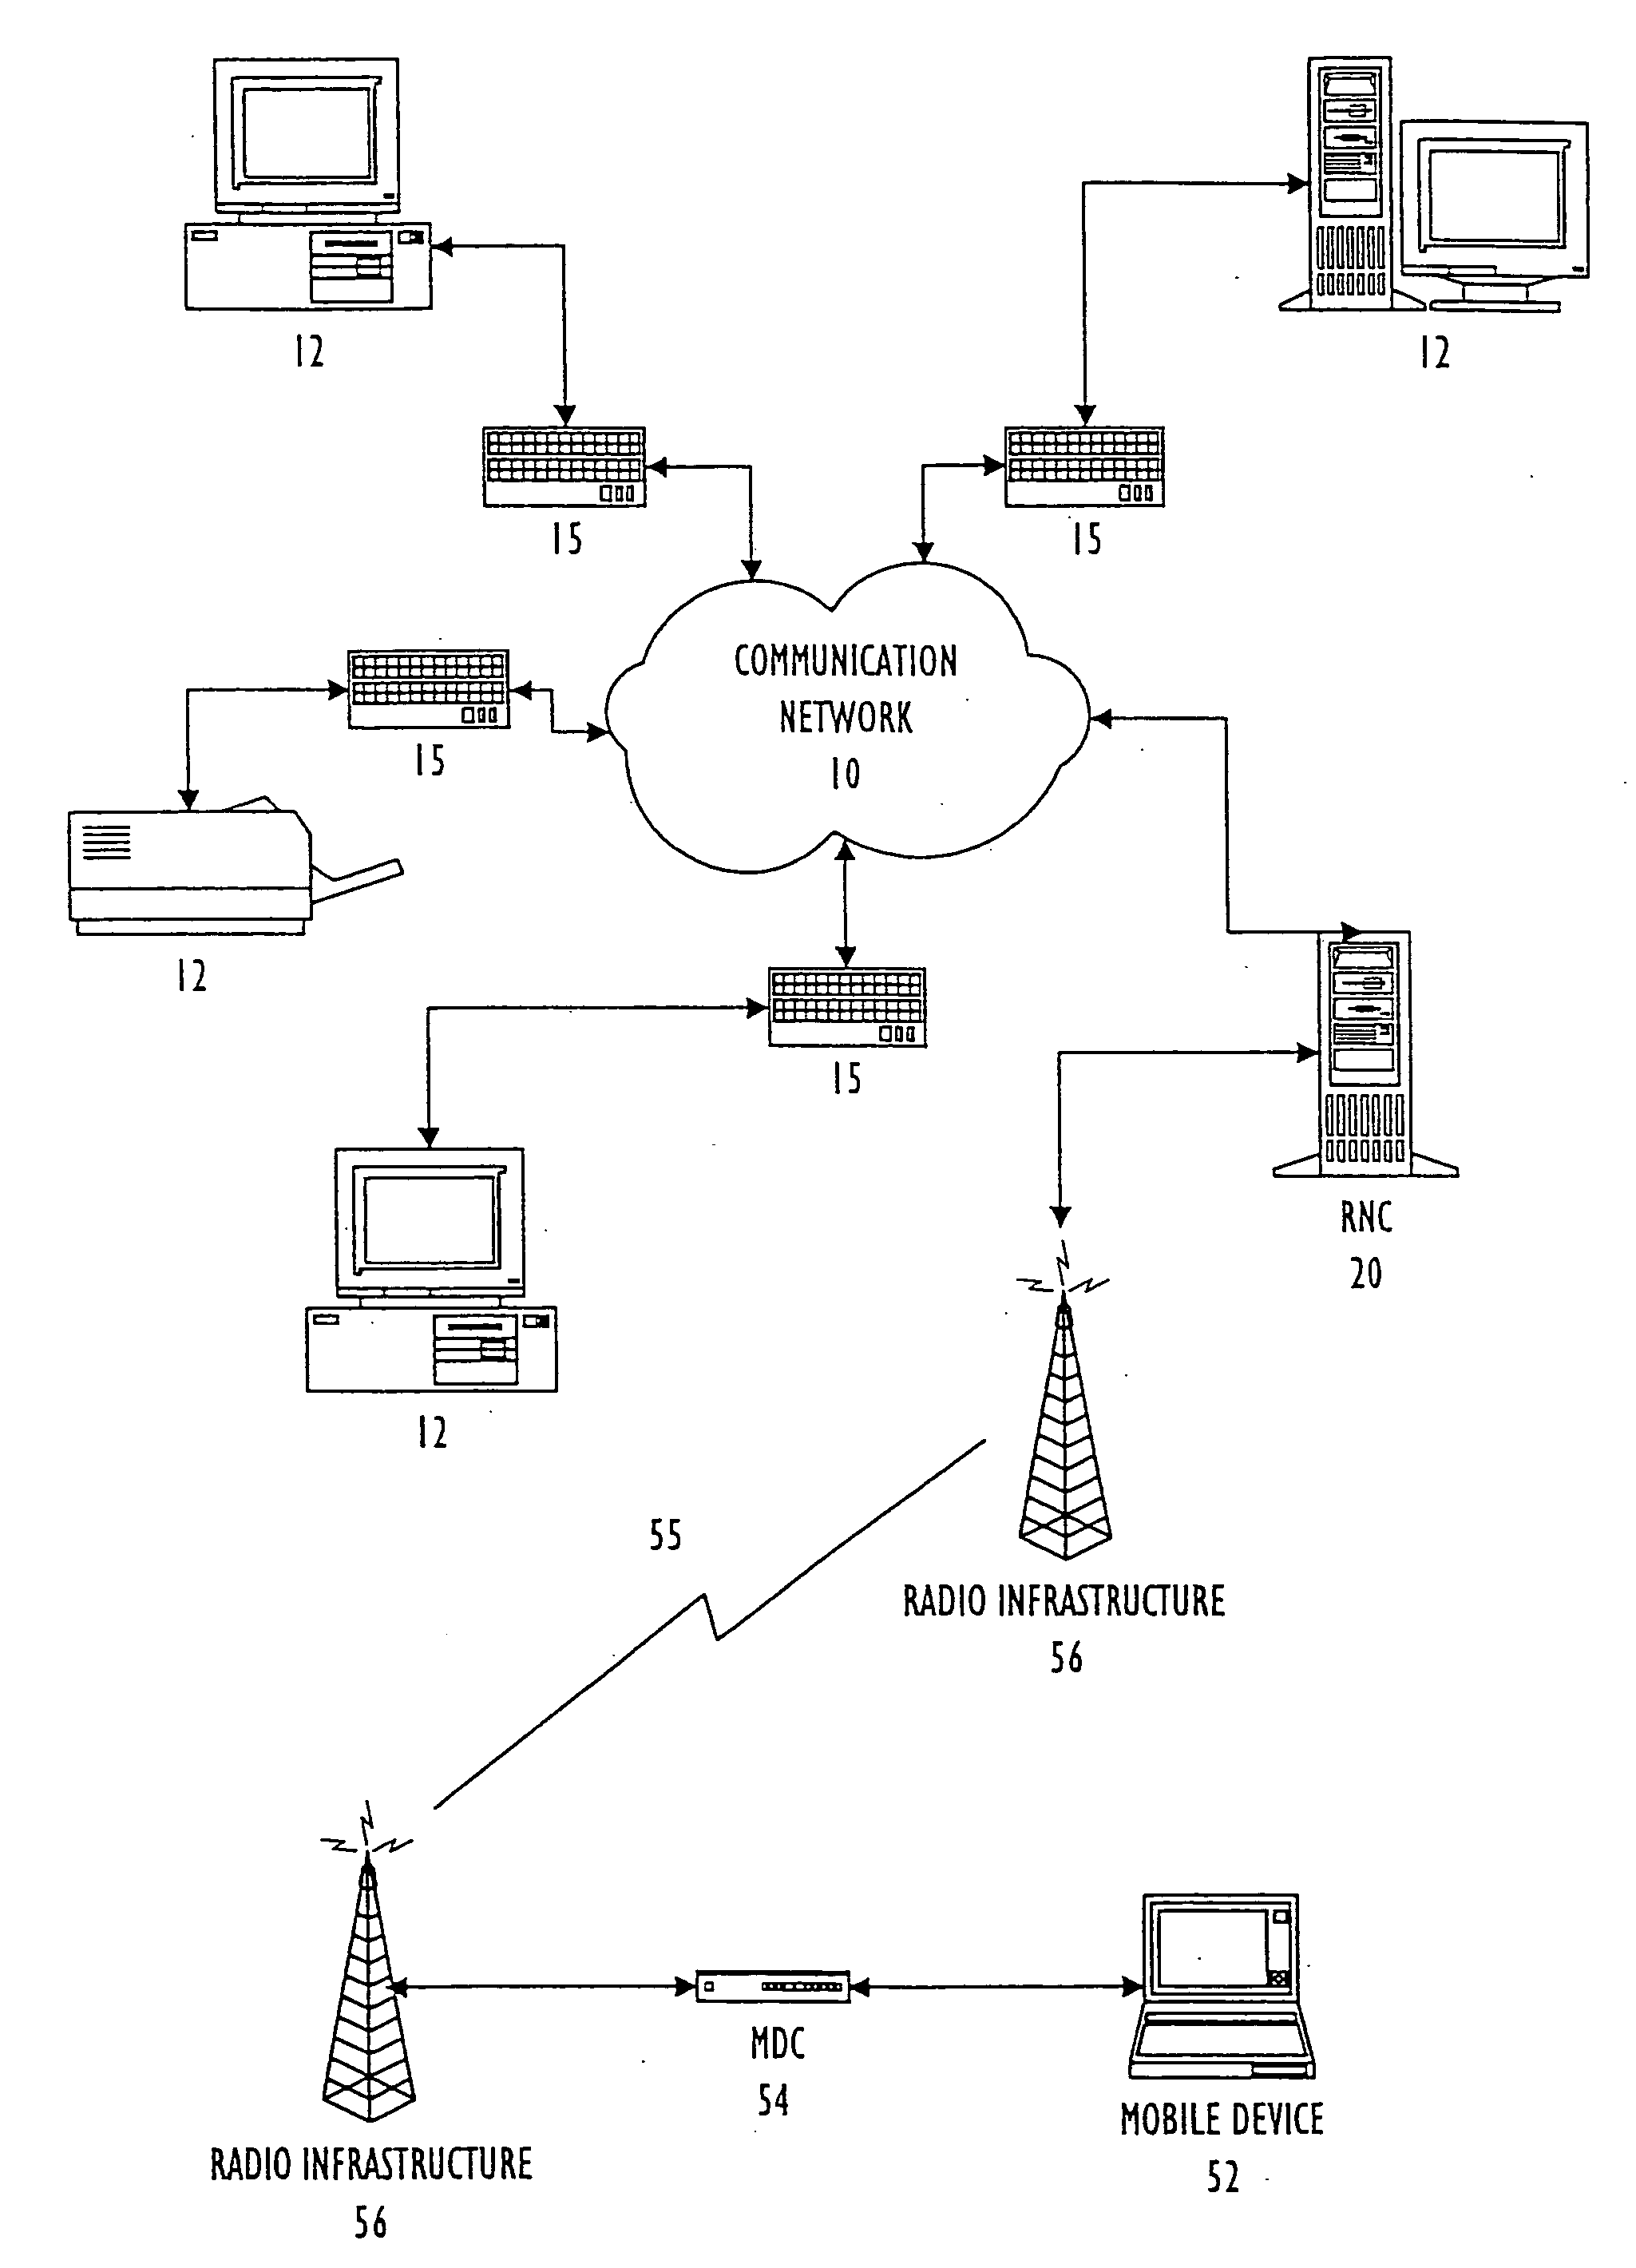 Method and apparatus for routing data over multiple wireless networks